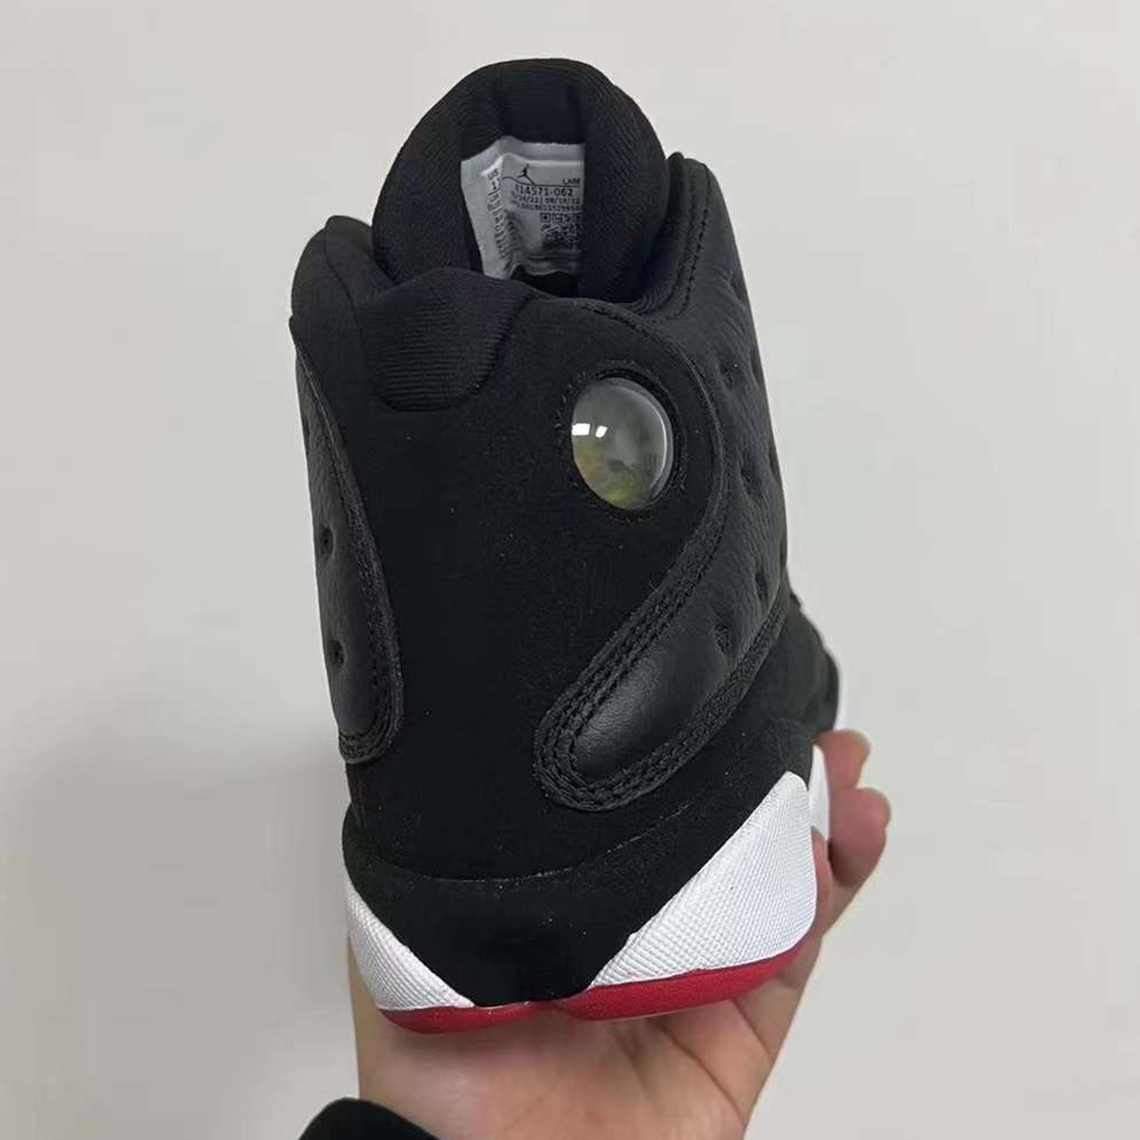 First Look At The Air Jordan 13 "Playoffs" Releasing In 2023